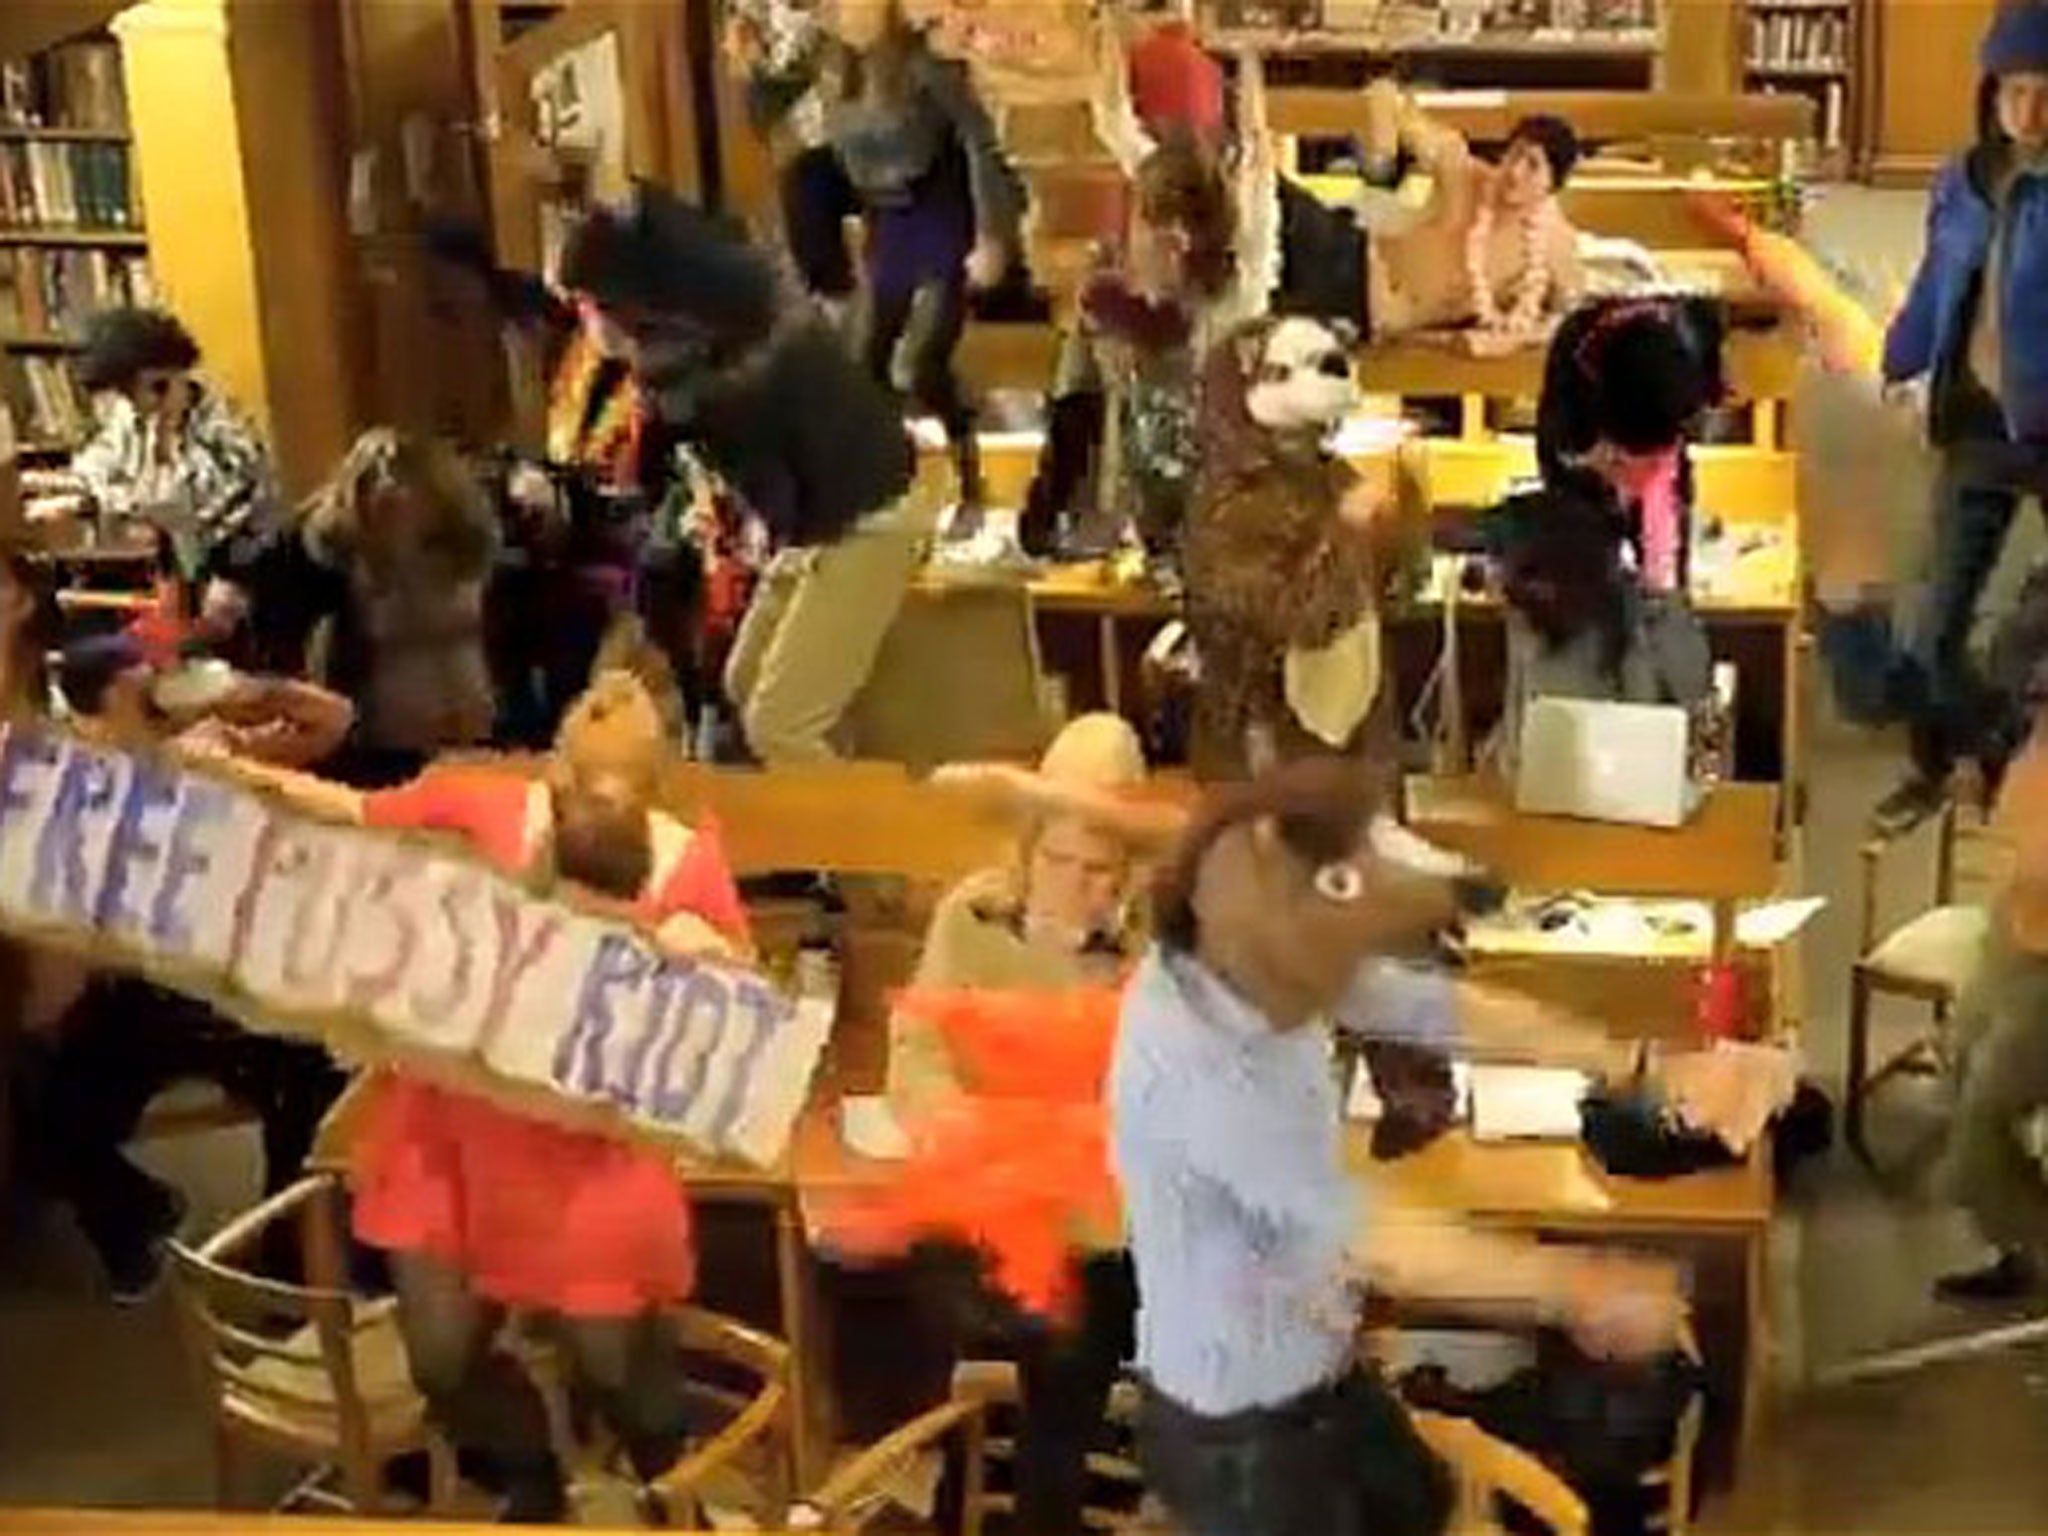 Outraged Oxford university students have called for a librarian to be reinstated after she was fired for letting students make a Harlem Shake video on her watch